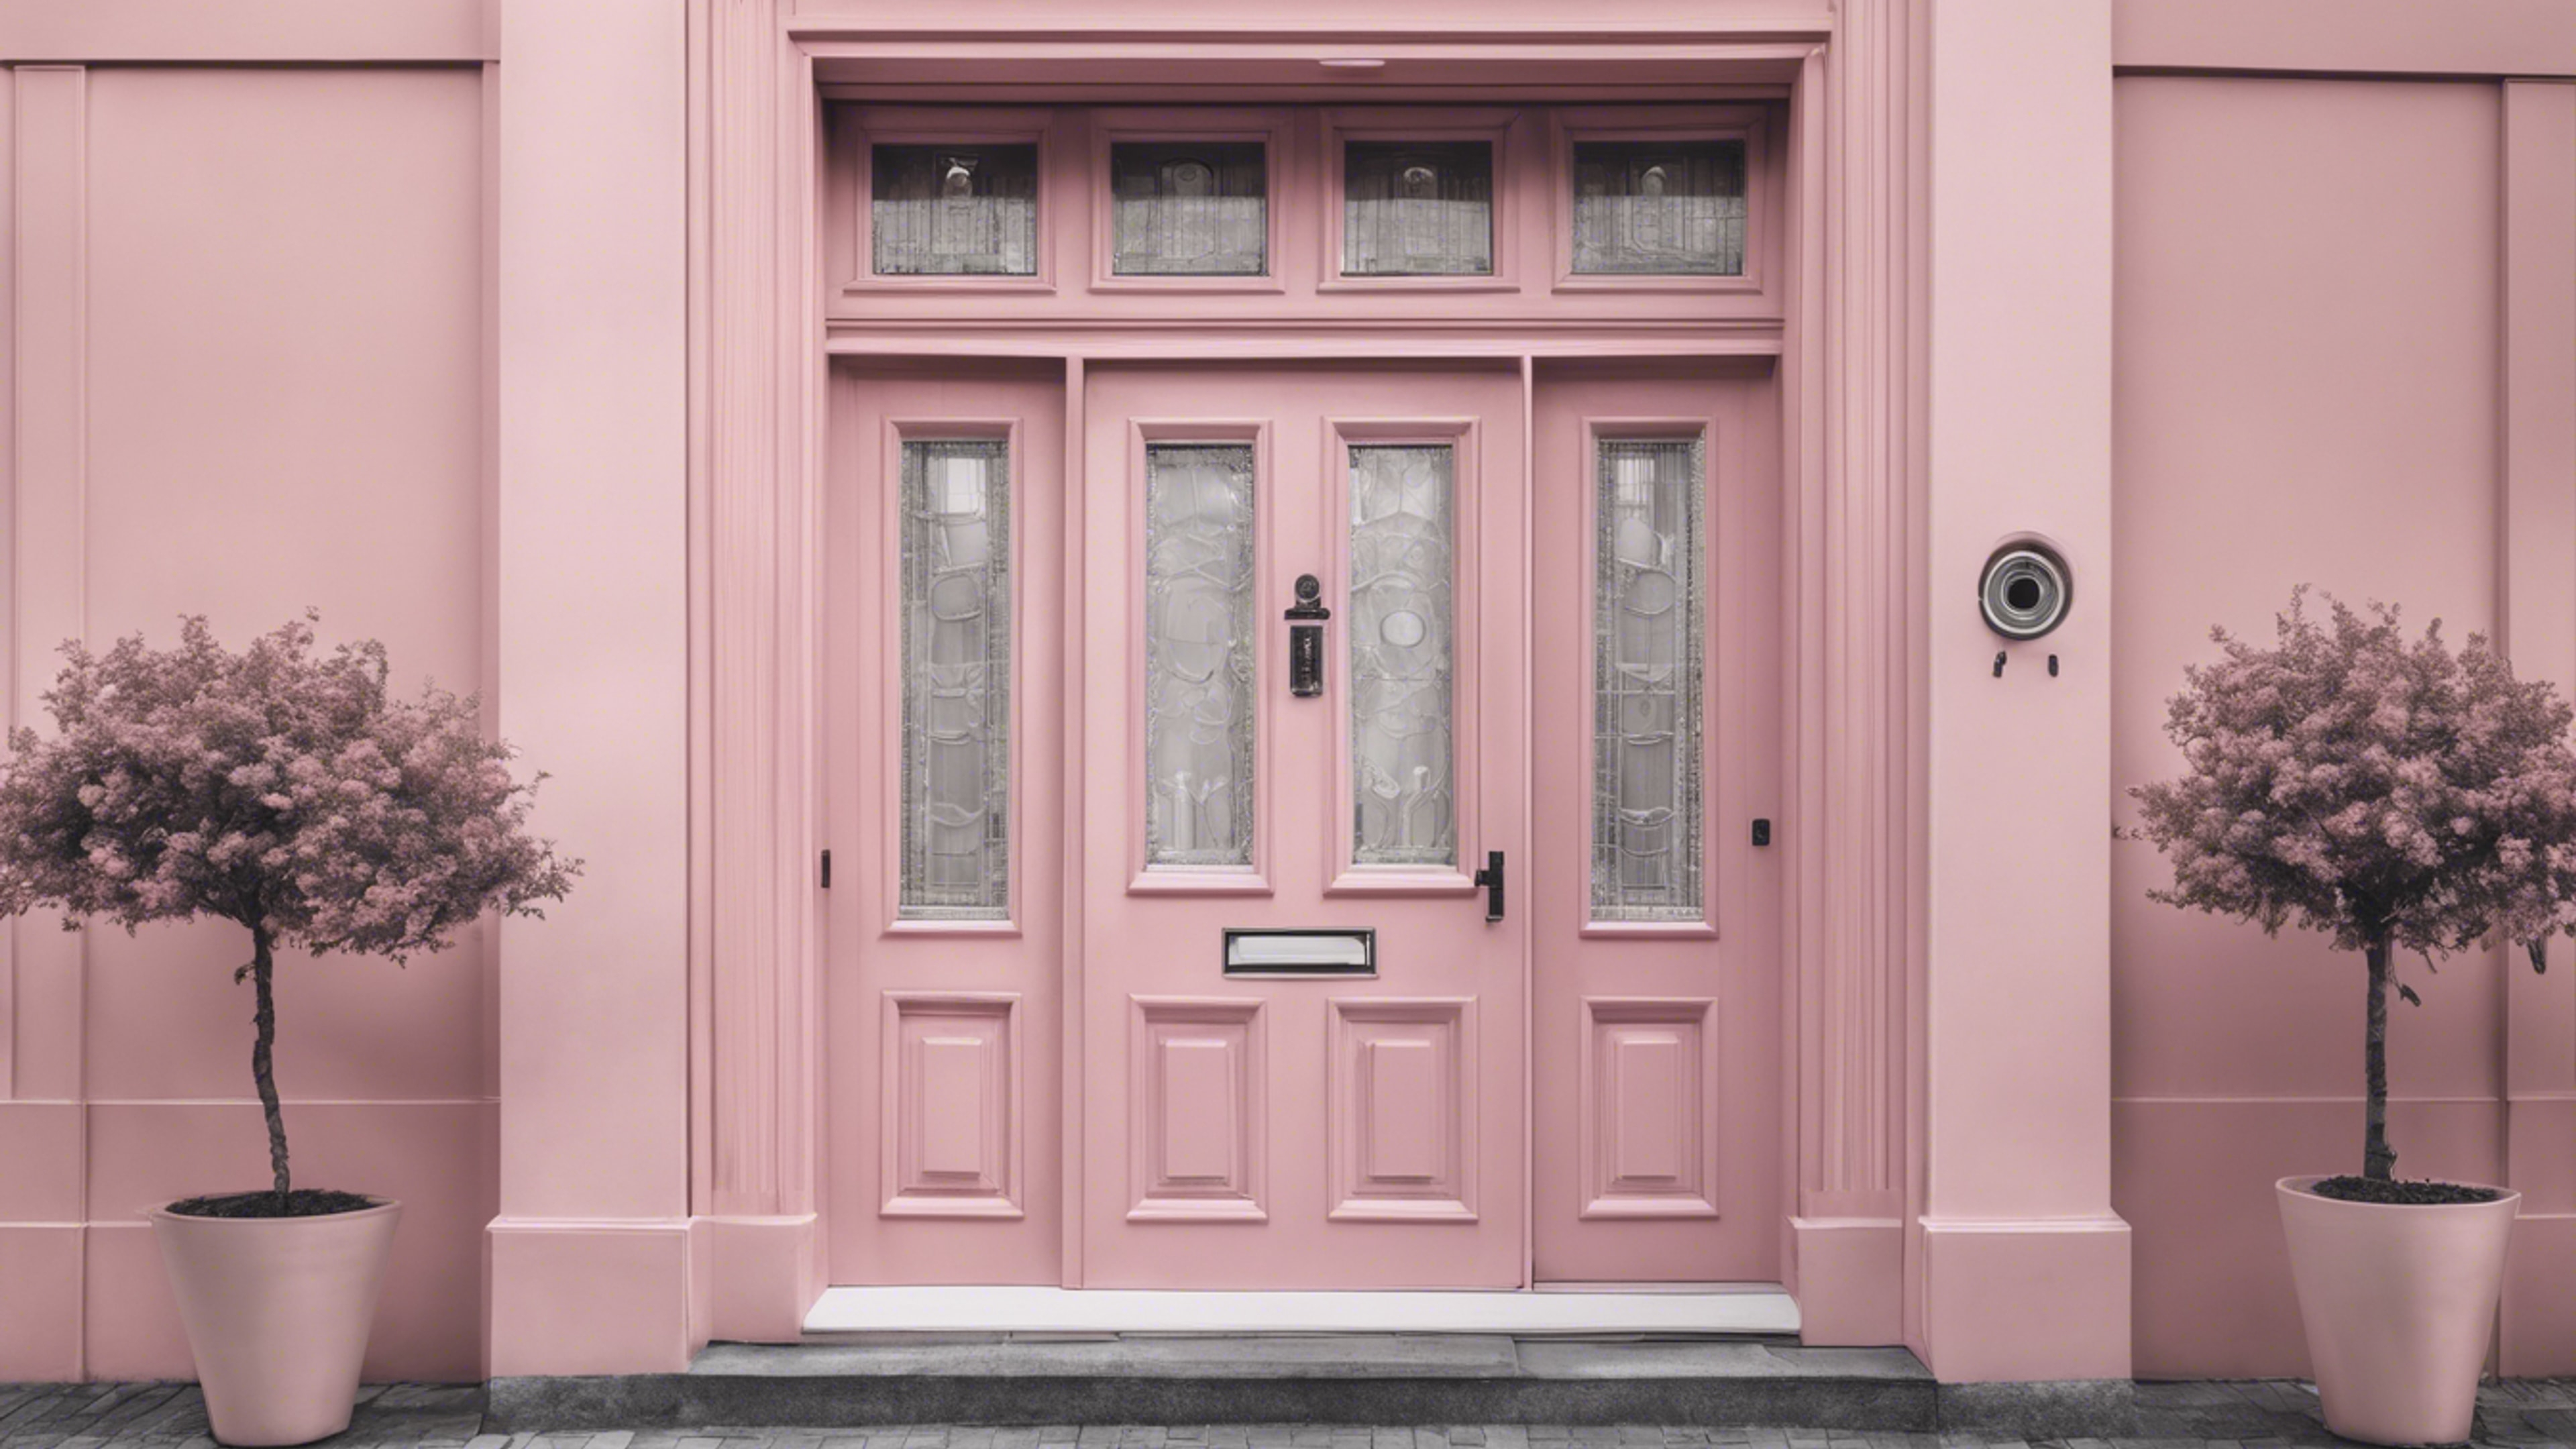 Monochrome image of a sophisticated townhouse door painted in a fetching preppy pastel pink. Обои[a9cdce63c1c94c029691]